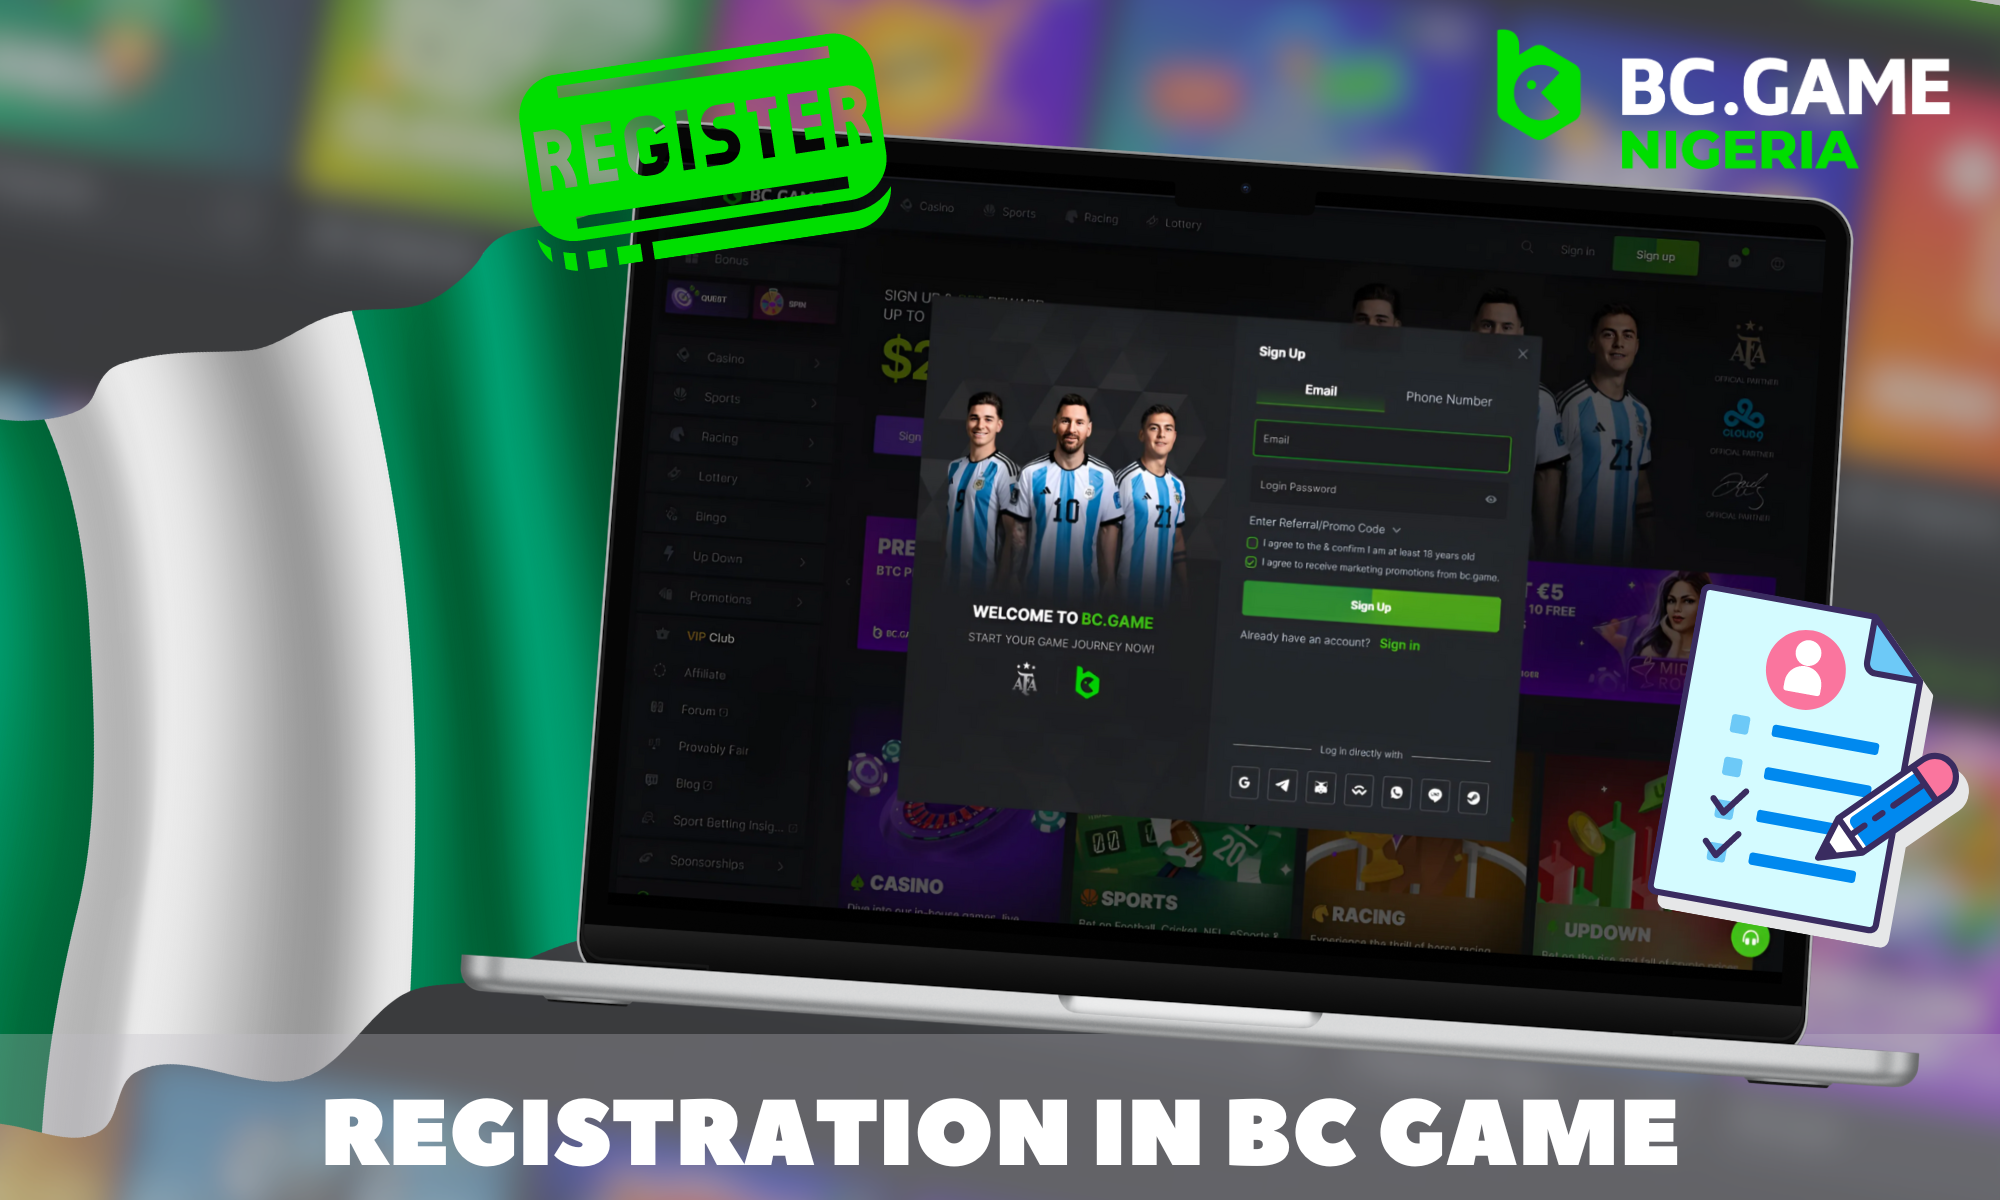 The registration process in BC Game is quite simple